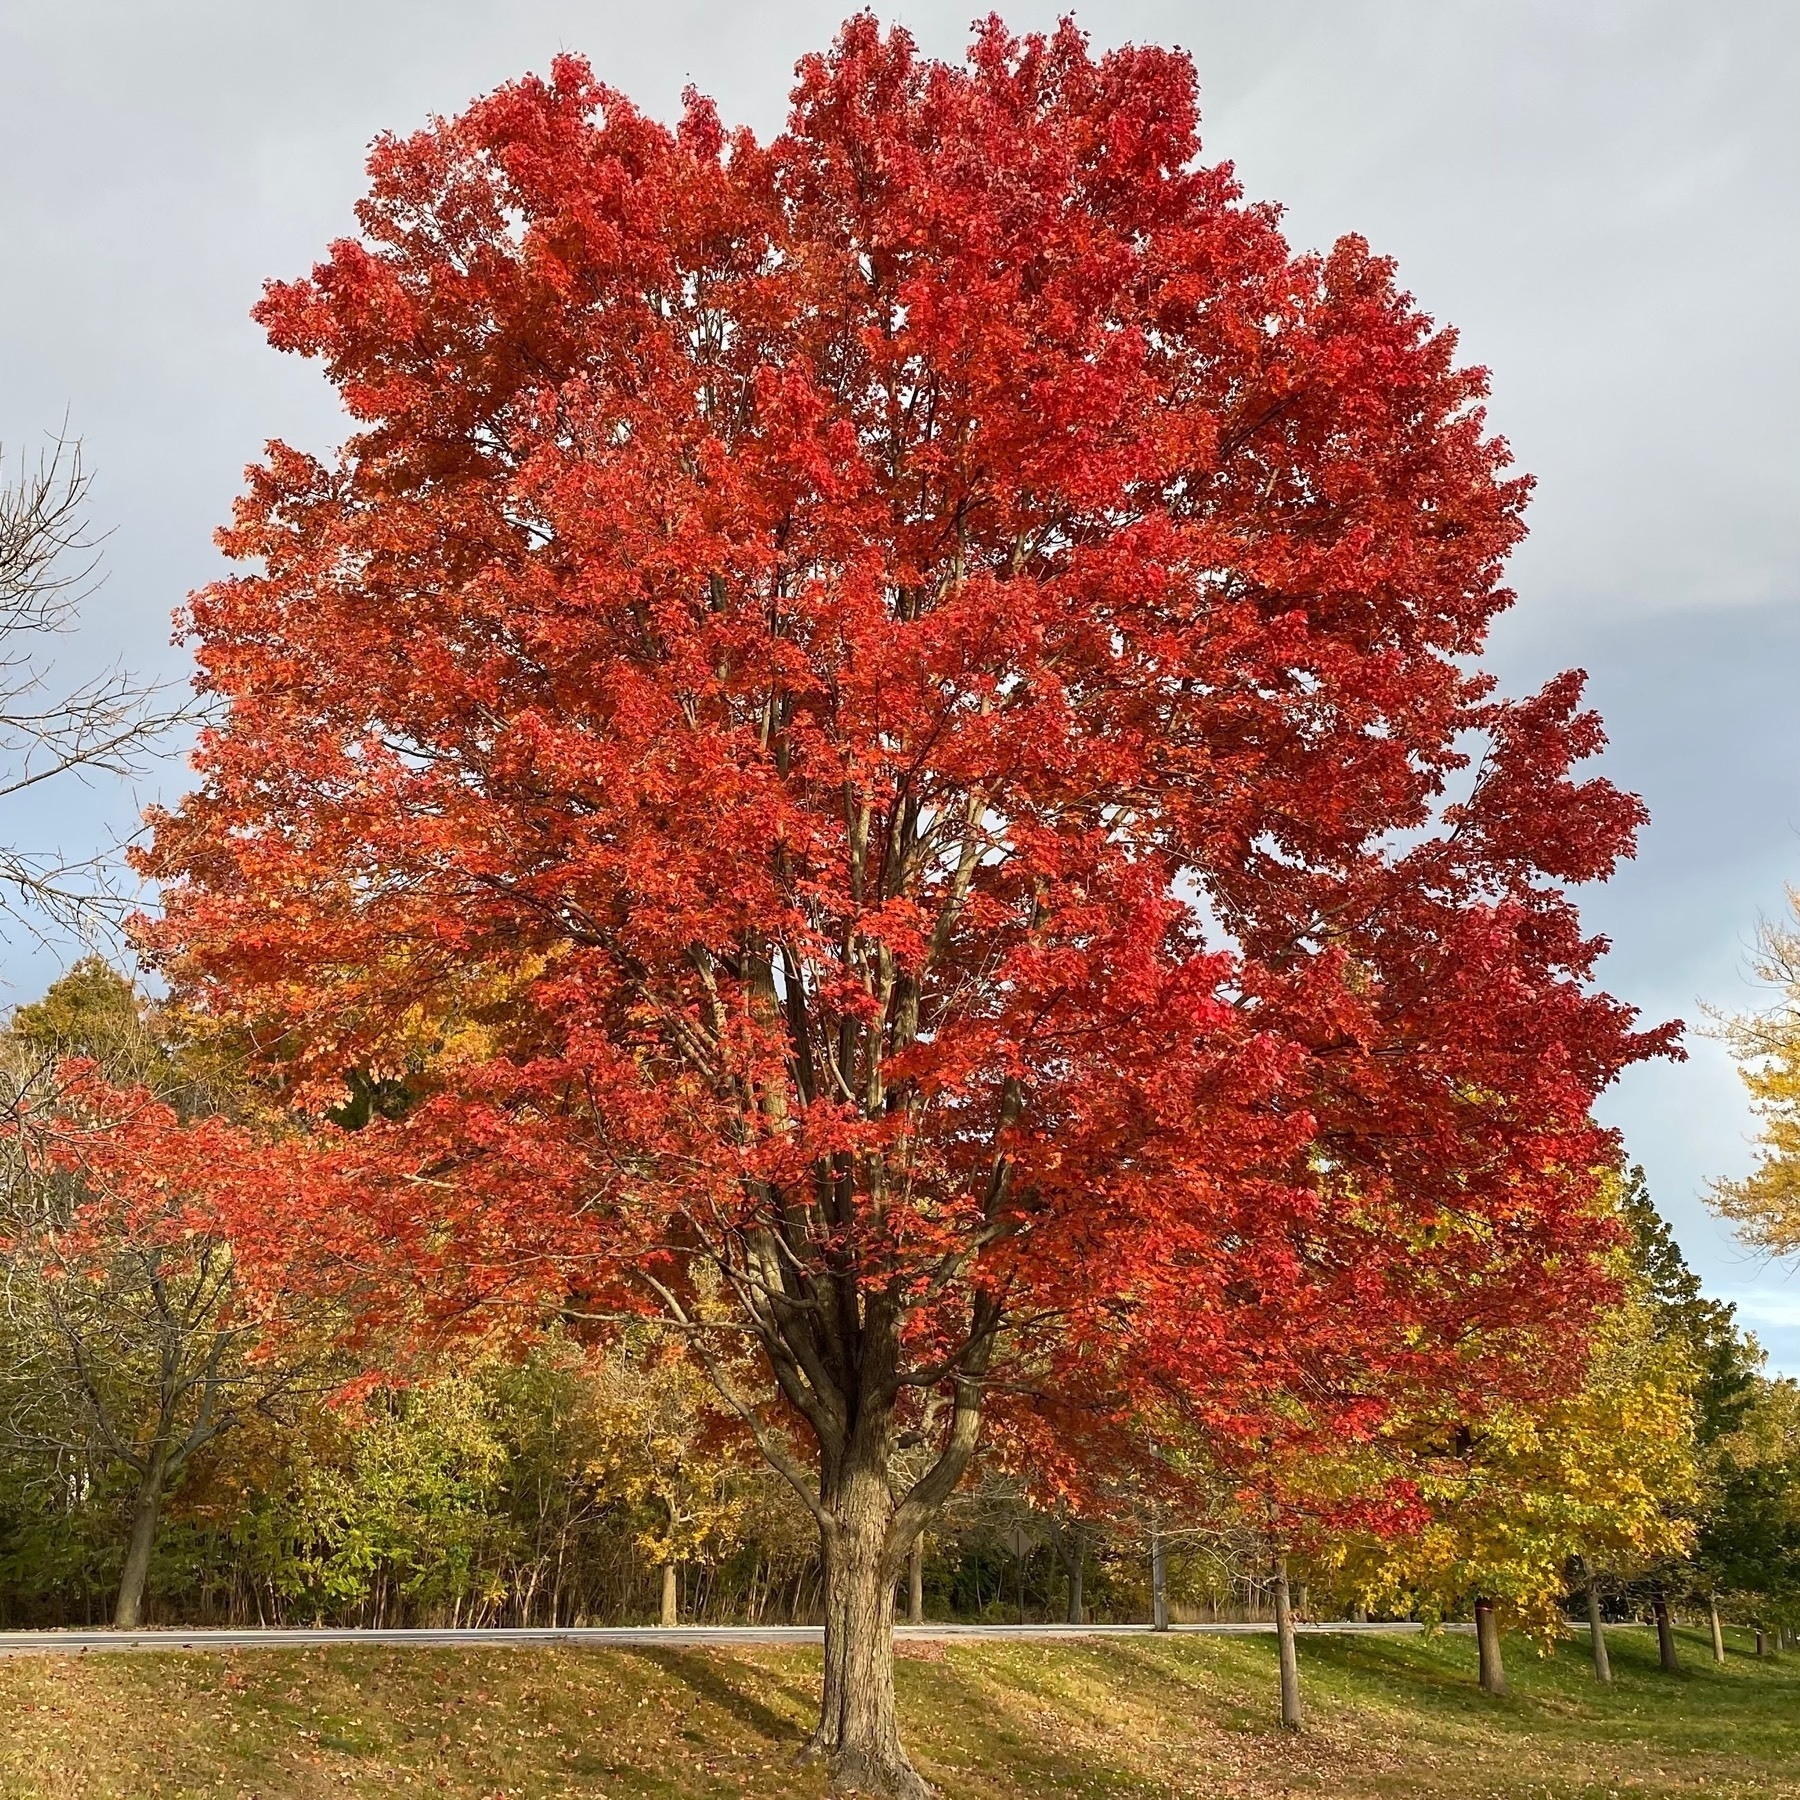 Large tree with bright red fall foliage.